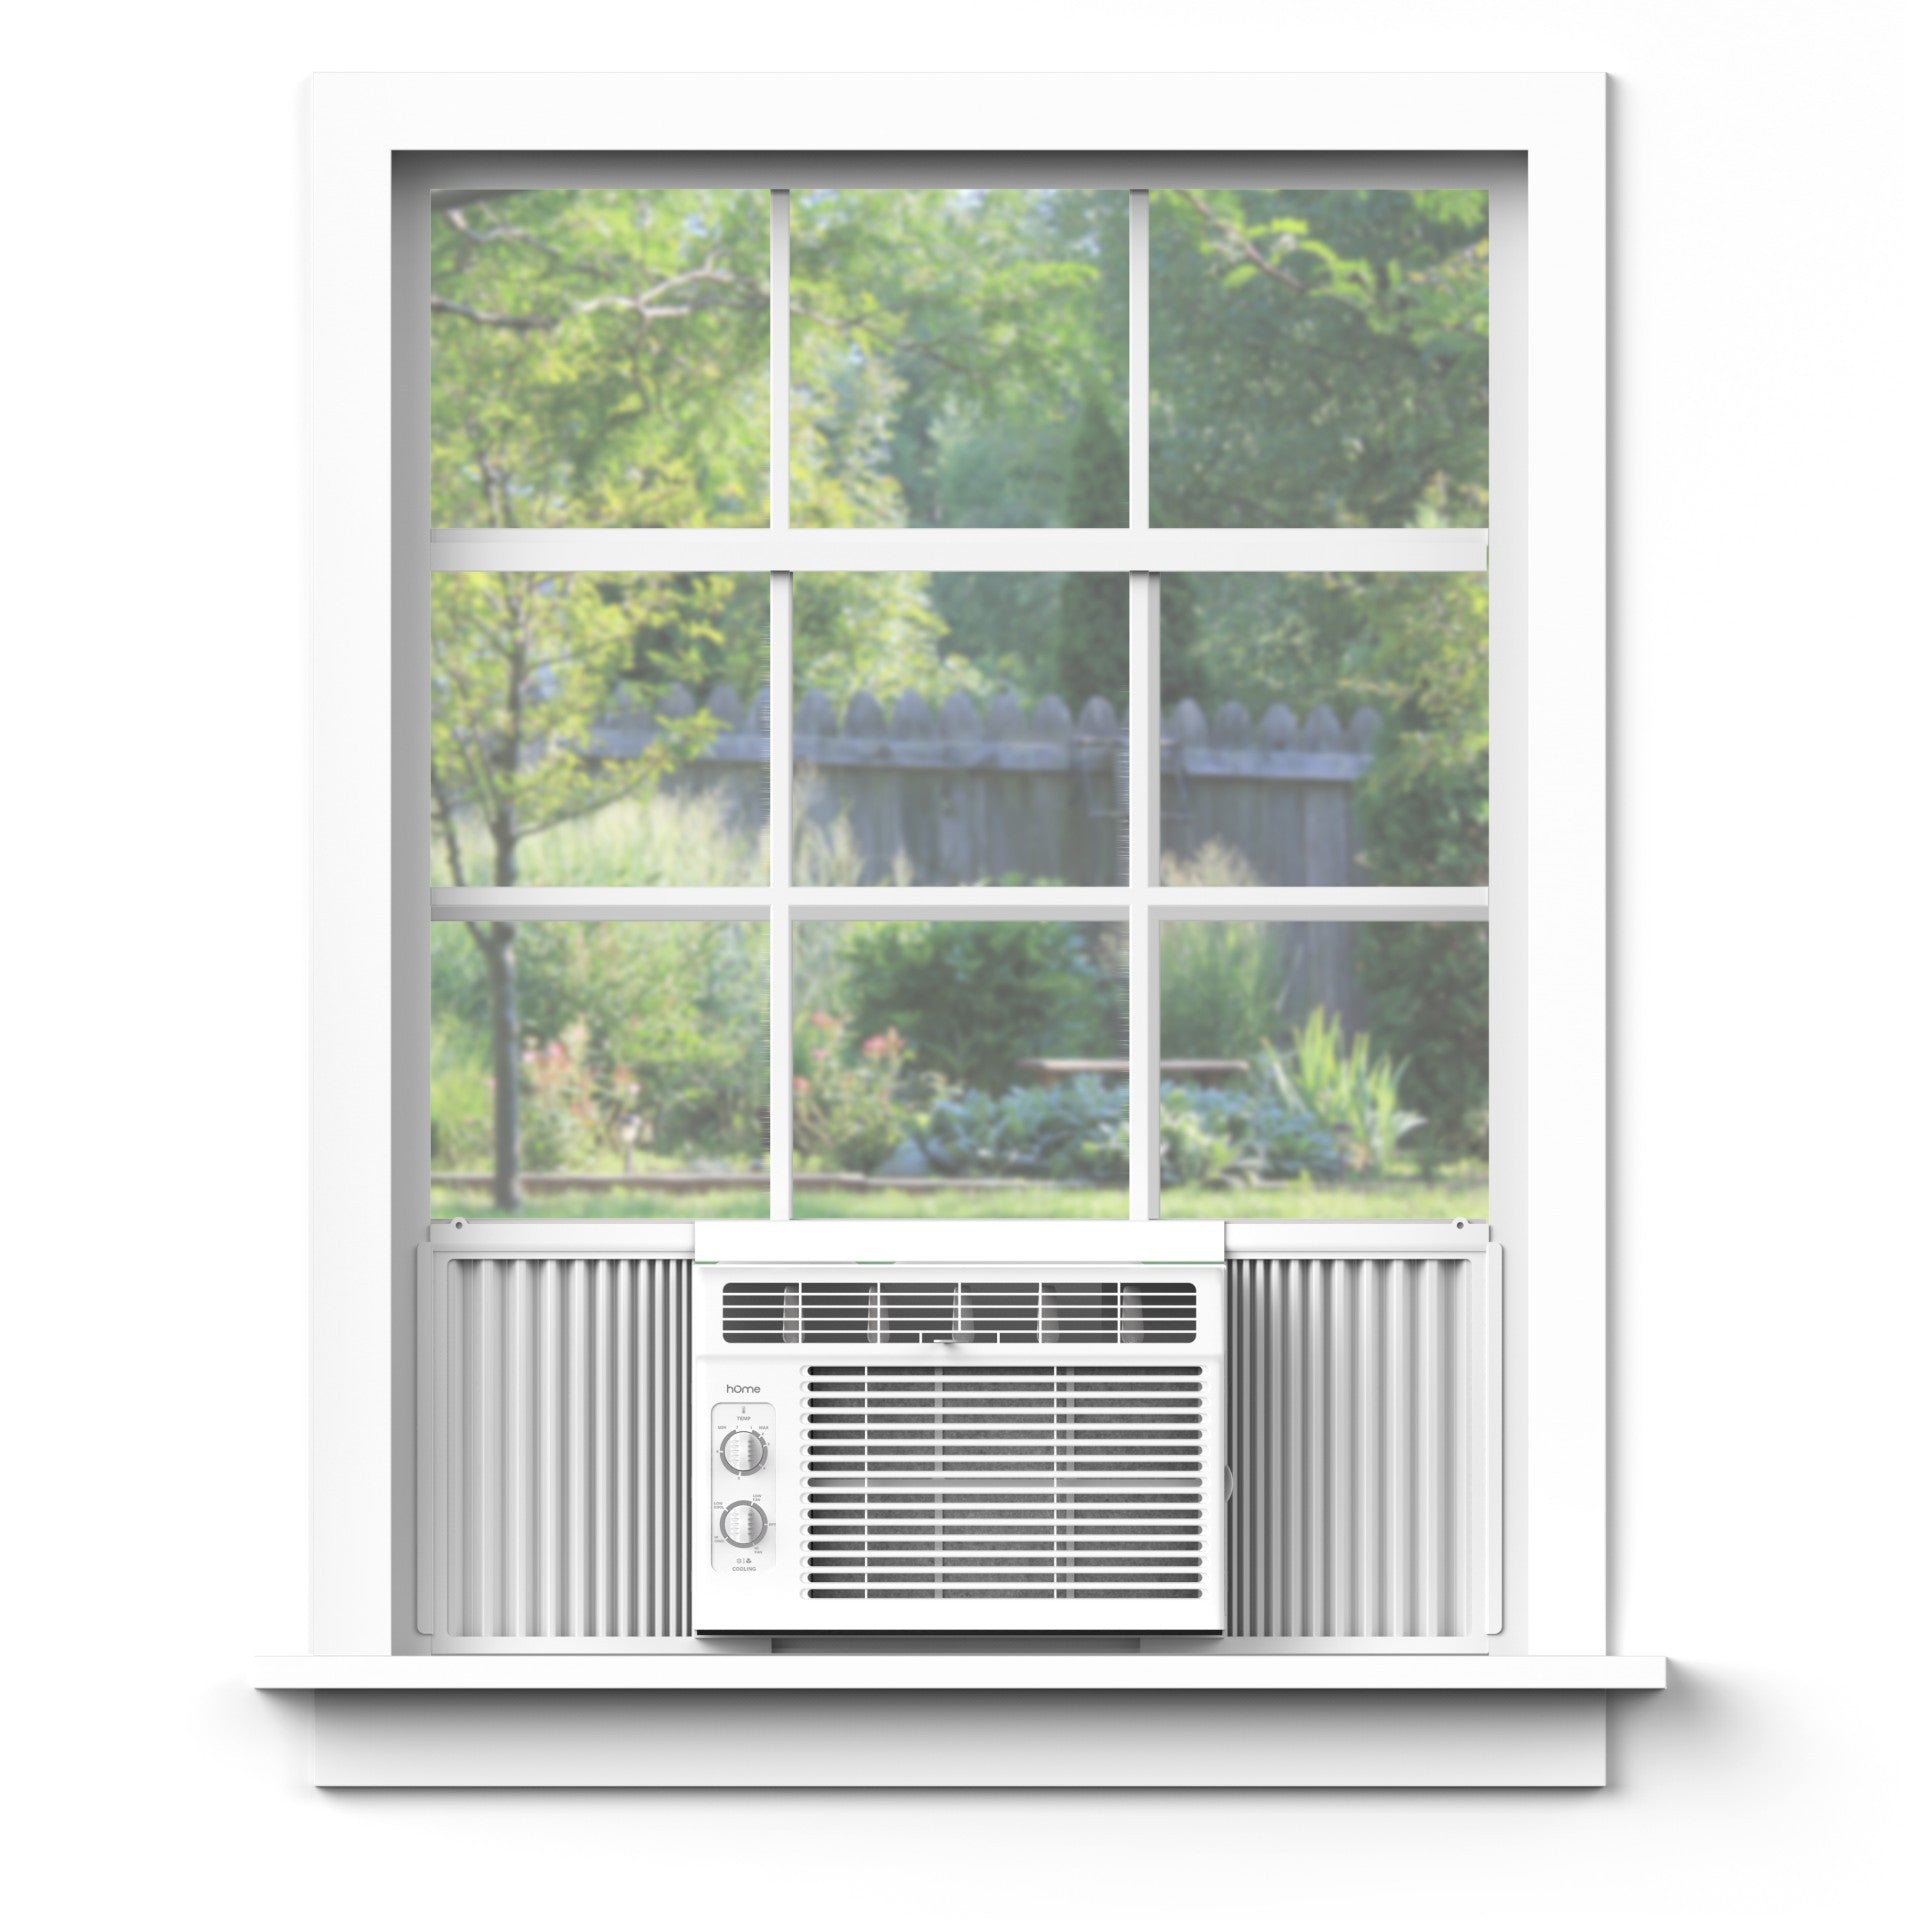 Air conditioner in the window